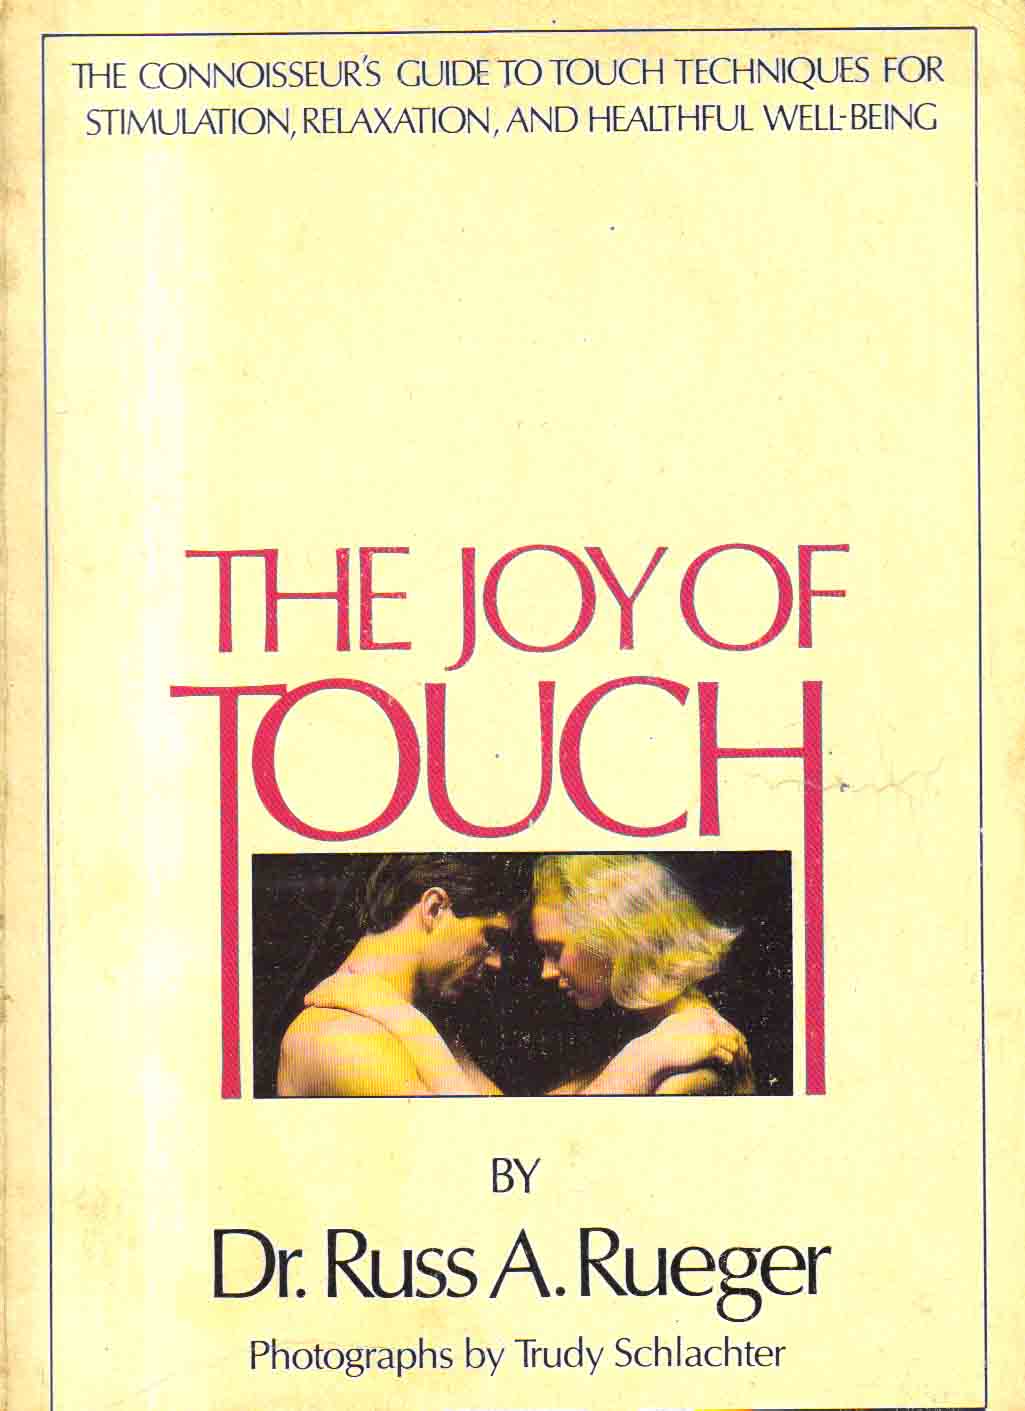 The Joy of Touch.